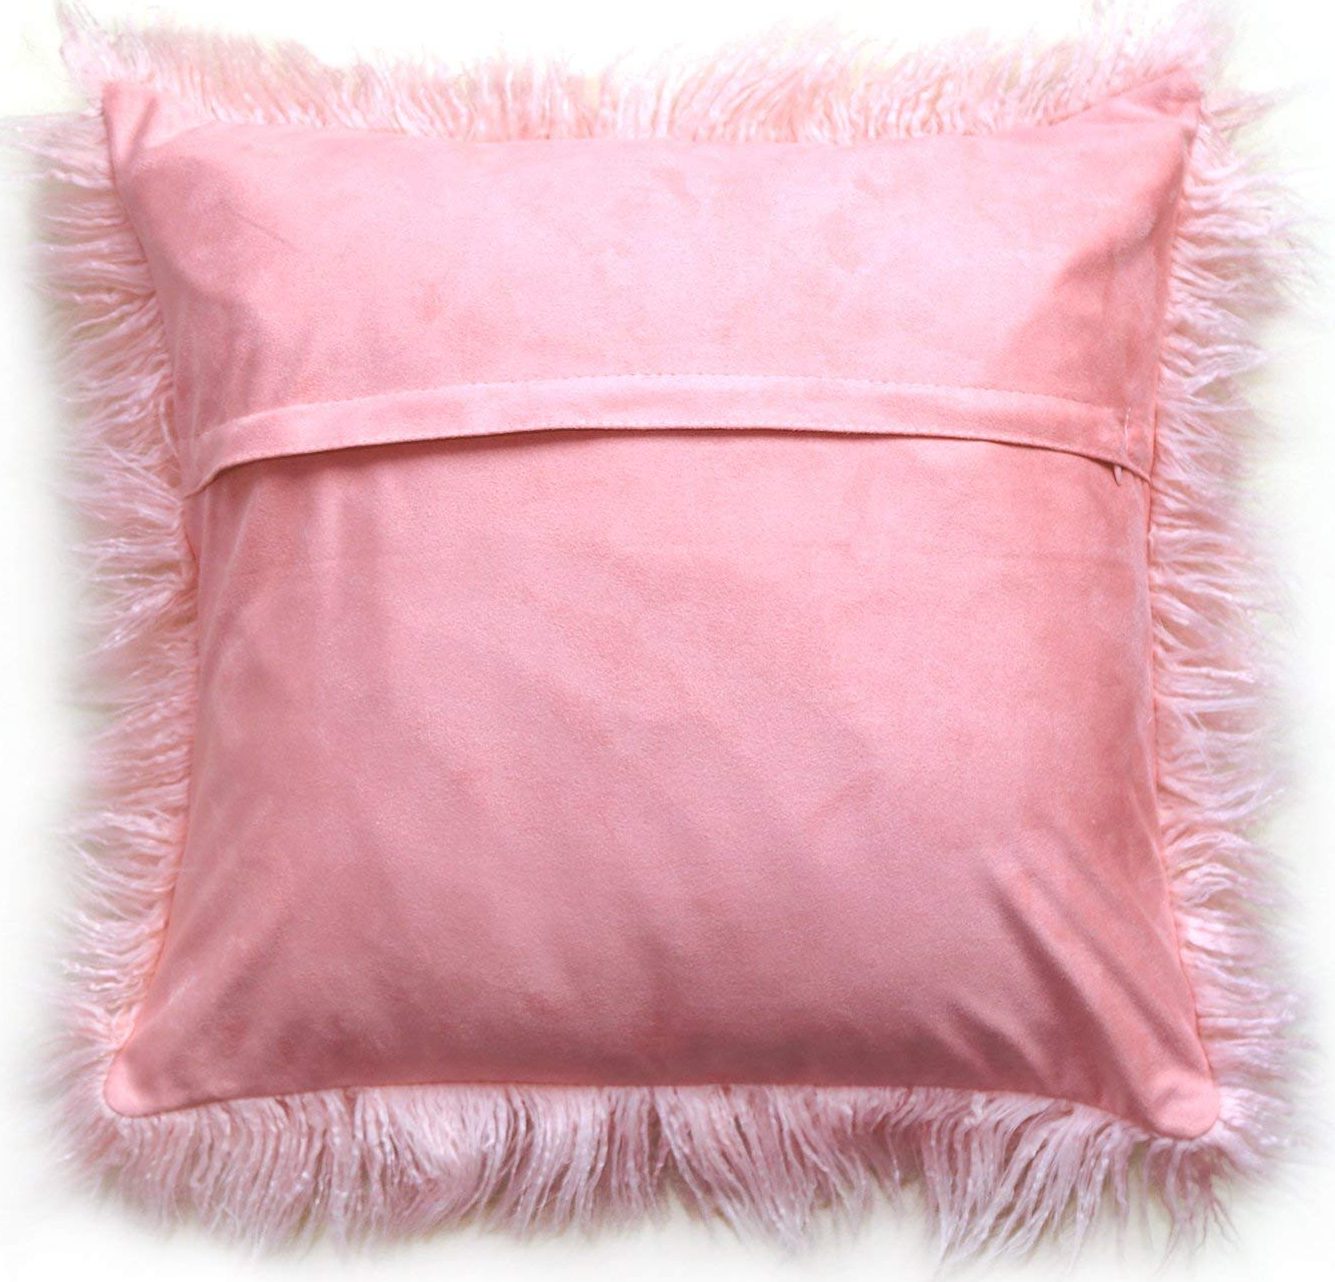 Ojia Pillows